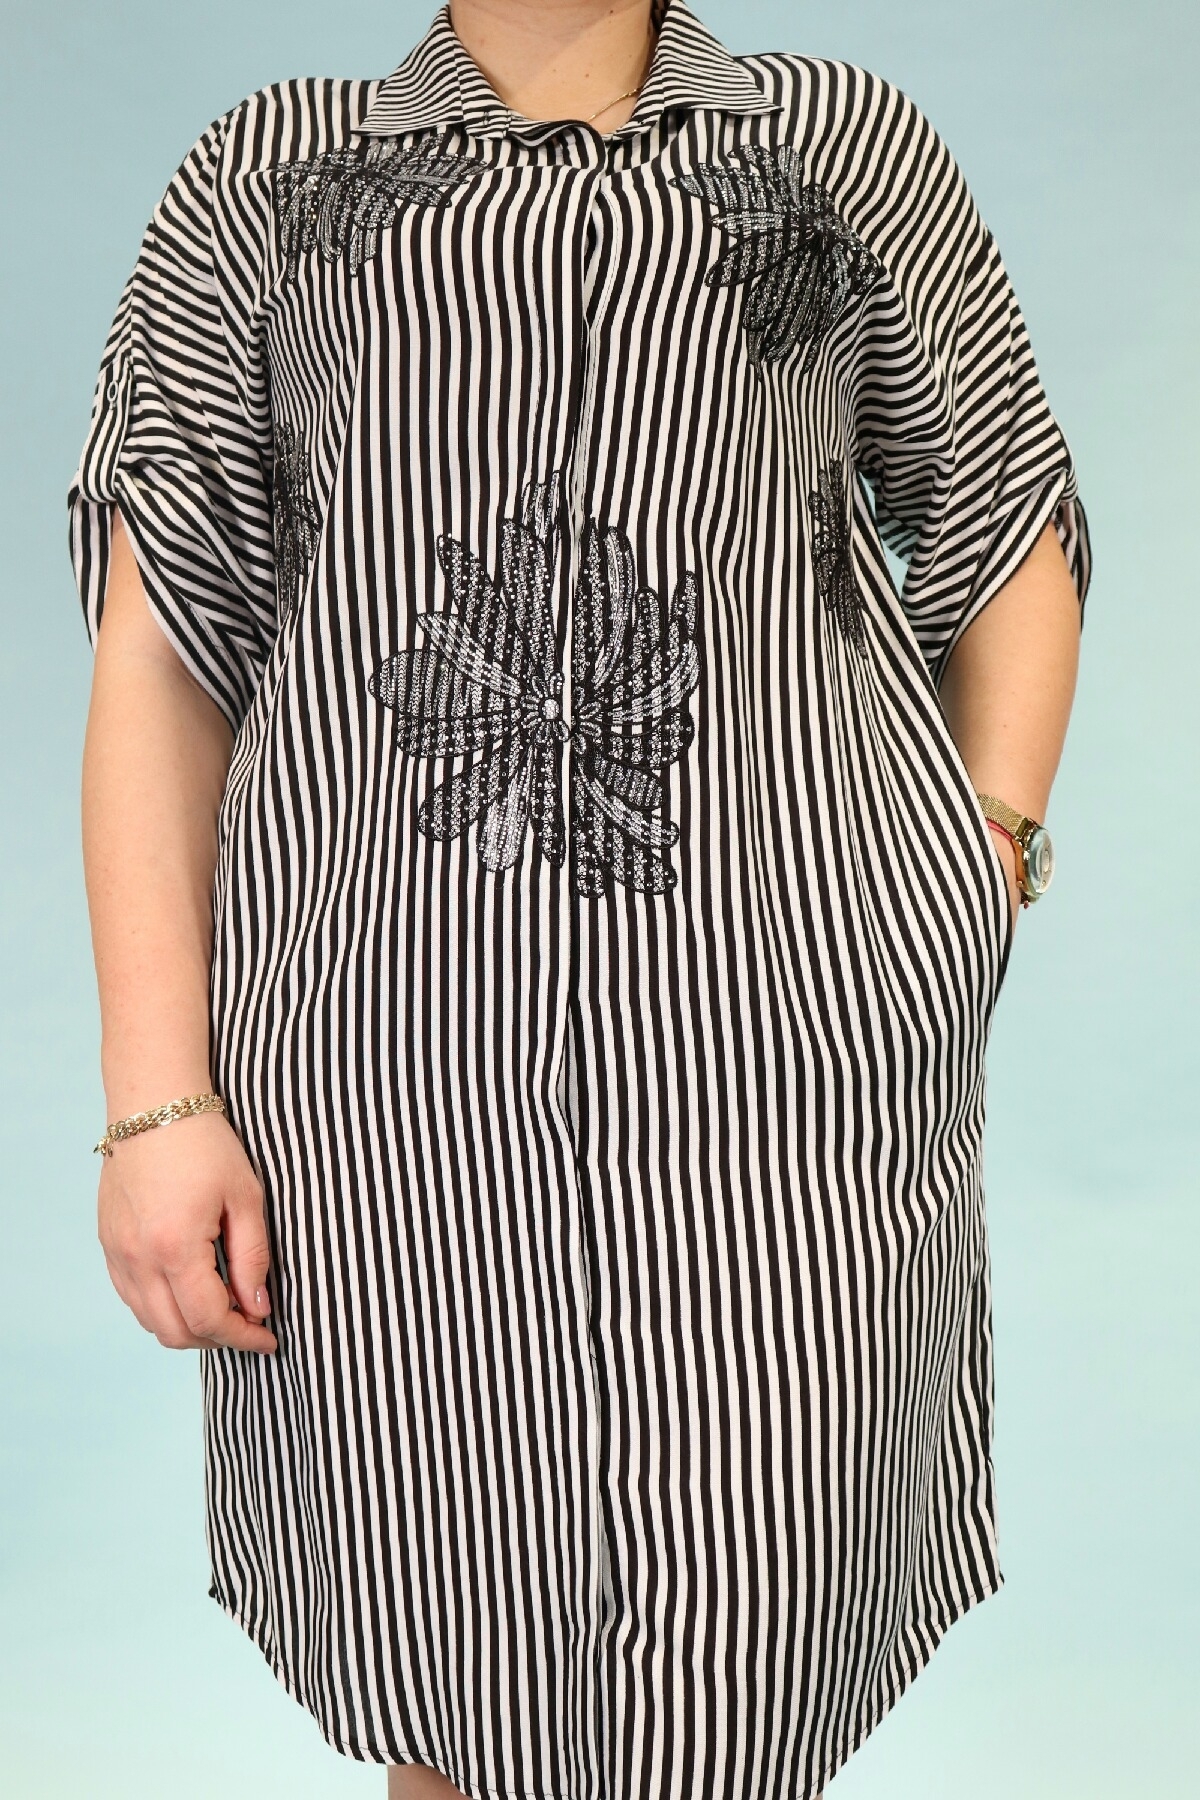 Plus size shirt dress with adjustable short sleeves, front buttons, pockets, stripes, knee-length, floral embroidery